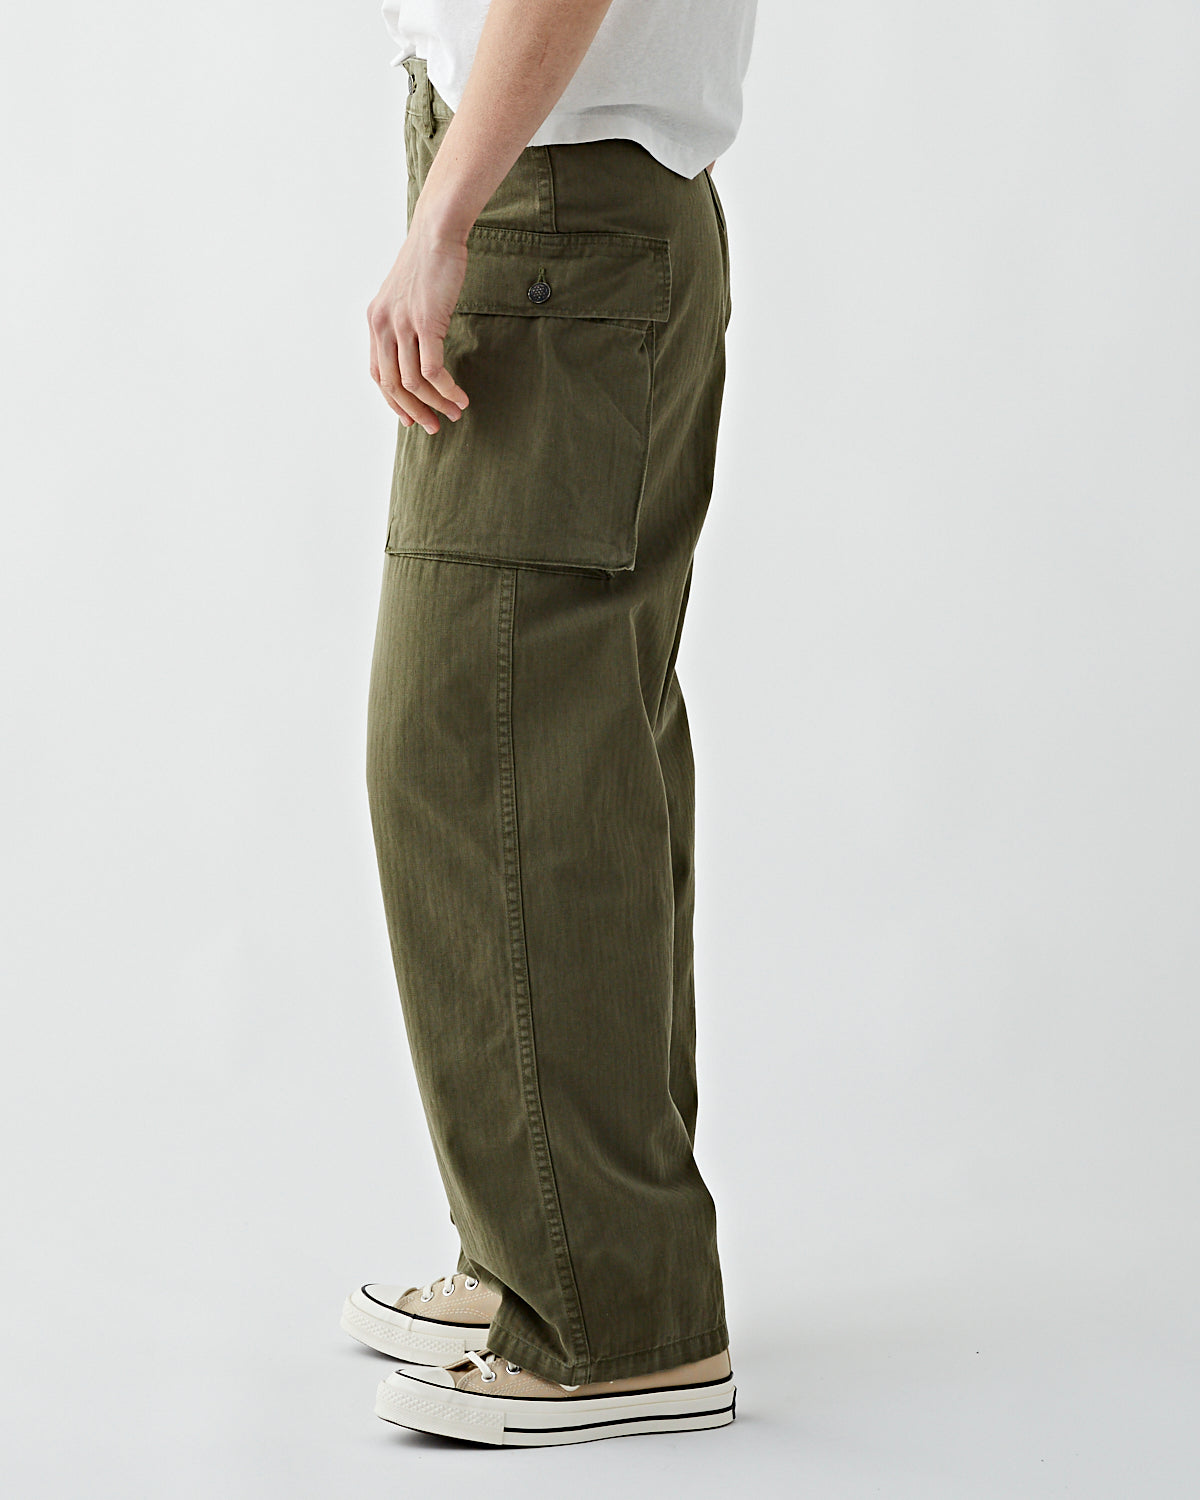 Army Cargo Pants in Mysore  Dealers Manufacturers  Suppliers  Justdial